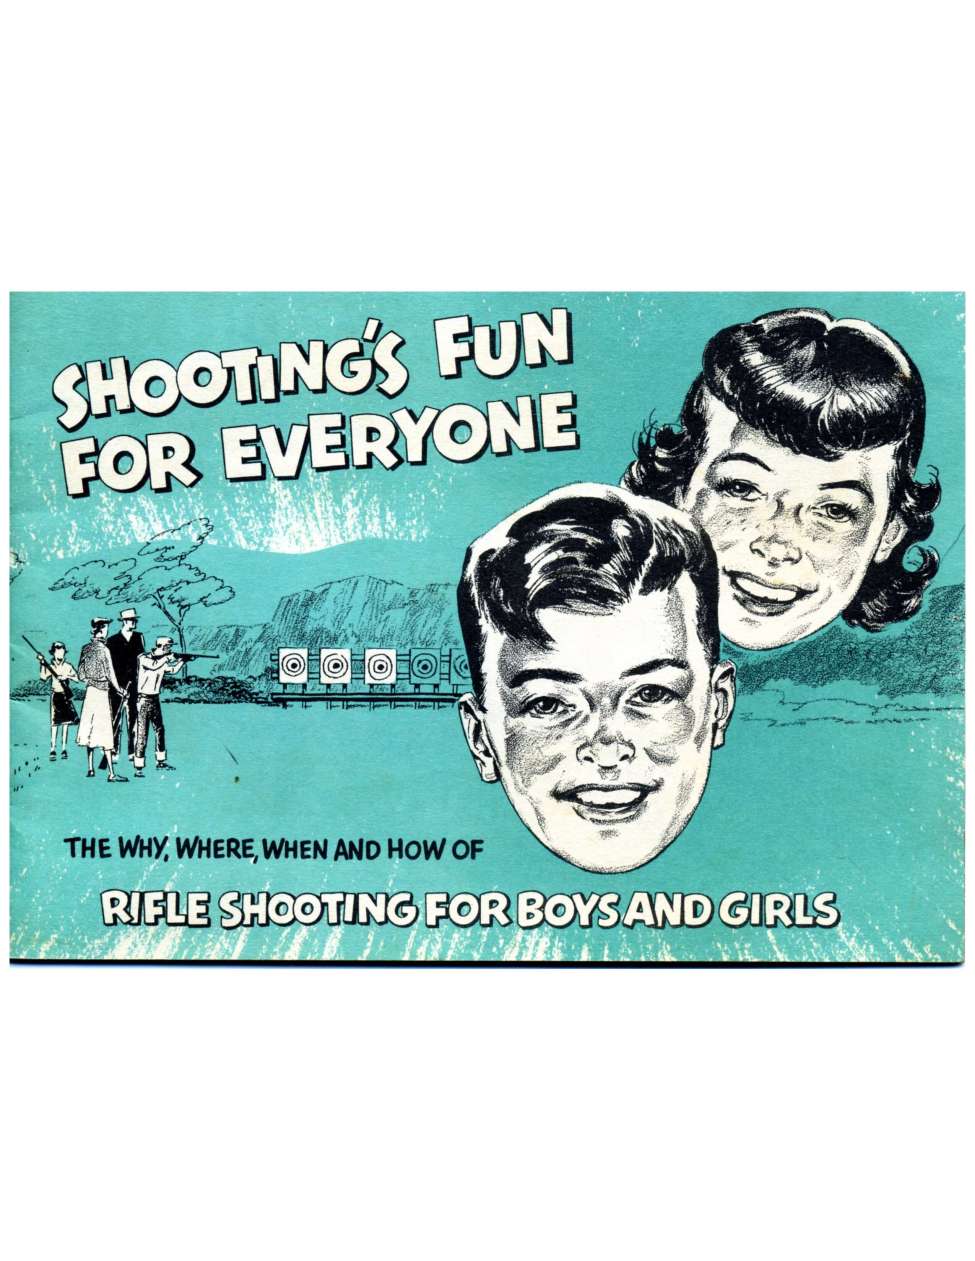 Book Cover For Shooting's Fun For Everyone